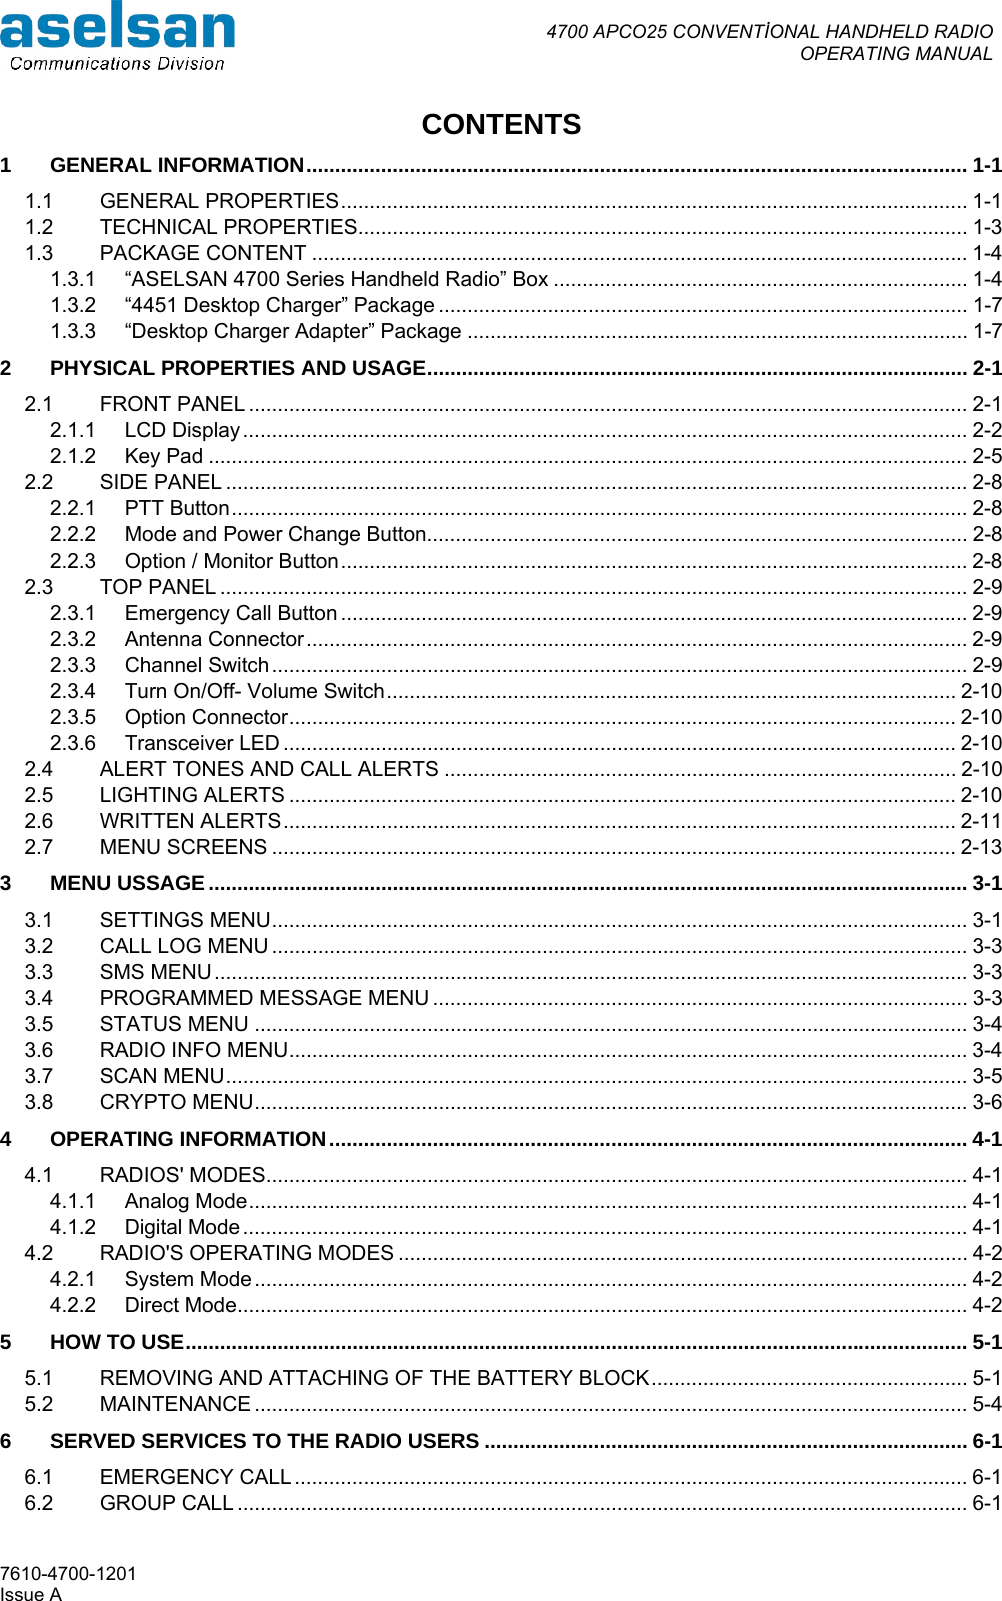  4700 APCO25 CONVENTİONAL HANDHELD RADIO  OPERATING MANUAL   7610-4700-1201 Issue A CONTENTS 1 GENERAL INFORMATION................................................................................................................... 1-1 1.1 GENERAL PROPERTIES............................................................................................................. 1-1 1.2 TECHNICAL PROPERTIES.......................................................................................................... 1-3 1.3 PACKAGE CONTENT .................................................................................................................. 1-4 1.3.1 “ASELSAN 4700 Series Handheld Radio” Box ........................................................................ 1-4 1.3.2 “4451 Desktop Charger” Package ............................................................................................ 1-7 1.3.3 “Desktop Charger Adapter” Package ....................................................................................... 1-7 2 PHYSICAL PROPERTIES AND USAGE.............................................................................................. 2-1 2.1 FRONT PANEL ............................................................................................................................. 2-1 2.1.1 LCD Display.............................................................................................................................. 2-2 2.1.2 Key Pad .................................................................................................................................... 2-5 2.2 SIDE PANEL ................................................................................................................................. 2-8 2.2.1 PTT Button................................................................................................................................ 2-8 2.2.2 Mode and Power Change Button.............................................................................................. 2-8 2.2.3 Option / Monitor Button............................................................................................................. 2-8 2.3 TOP PANEL .................................................................................................................................. 2-9 2.3.1 Emergency Call Button ............................................................................................................. 2-9 2.3.2 Antenna Connector................................................................................................................... 2-9 2.3.3 Channel Switch......................................................................................................................... 2-9 2.3.4 Turn On/Off- Volume Switch................................................................................................... 2-10 2.3.5 Option Connector.................................................................................................................... 2-10 2.3.6 Transceiver LED ..................................................................................................................... 2-10 2.4 ALERT TONES AND CALL ALERTS ......................................................................................... 2-10 2.5 LIGHTING ALERTS .................................................................................................................... 2-10 2.6 WRITTEN ALERTS..................................................................................................................... 2-11 2.7 MENU SCREENS ....................................................................................................................... 2-13 3 MENU USSAGE.................................................................................................................................... 3-1 3.1 SETTINGS MENU......................................................................................................................... 3-1 3.2 CALL LOG MENU ......................................................................................................................... 3-3 3.3 SMS MENU................................................................................................................................... 3-3 3.4 PROGRAMMED MESSAGE MENU ............................................................................................. 3-3 3.5 STATUS MENU ............................................................................................................................ 3-4 3.6 RADIO INFO MENU...................................................................................................................... 3-4 3.7 SCAN MENU................................................................................................................................. 3-5 3.8 CRYPTO MENU............................................................................................................................ 3-6 4 OPERATING INFORMATION............................................................................................................... 4-1 4.1 RADIOS&apos; MODES.......................................................................................................................... 4-1 4.1.1 Analog Mode............................................................................................................................. 4-1 4.1.2 Digital Mode.............................................................................................................................. 4-1 4.2 RADIO&apos;S OPERATING MODES ................................................................................................... 4-2 4.2.1 System Mode............................................................................................................................ 4-2 4.2.2 Direct Mode............................................................................................................................... 4-2 5 HOW TO USE........................................................................................................................................ 5-1 5.1 REMOVING AND ATTACHING OF THE BATTERY BLOCK....................................................... 5-1 5.2 MAINTENANCE ............................................................................................................................ 5-4 6 SERVED SERVICES TO THE RADIO USERS .................................................................................... 6-1 6.1 EMERGENCY CALL ..................................................................................................................... 6-1 6.2 GROUP CALL ............................................................................................................................... 6-1 